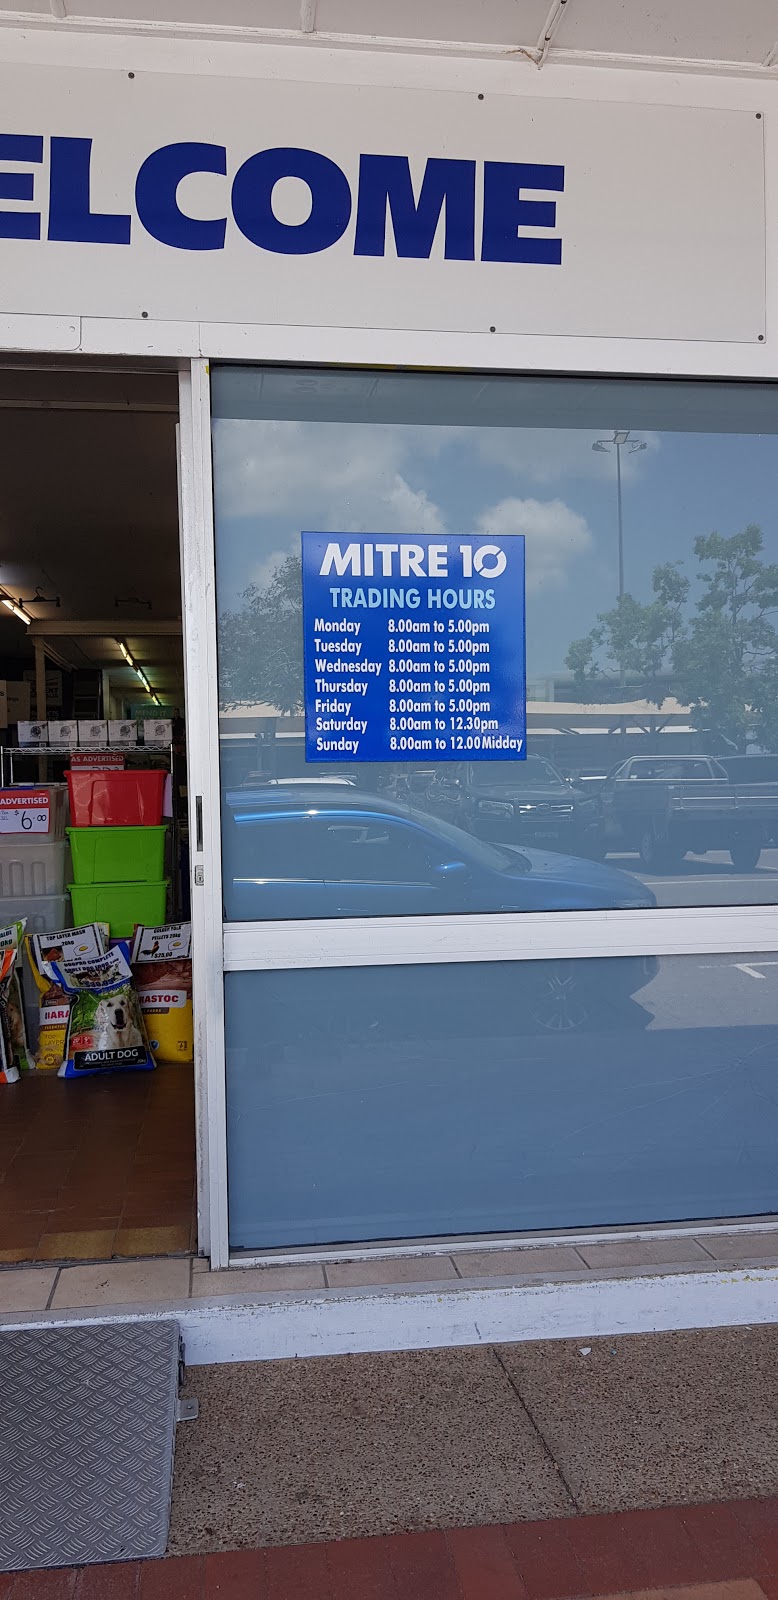 Parkside Mitre 10 | hardware store | 63-65 Queen St, Ayr QLD 4807, Australia | 0747838250 OR +61 7 4783 8250